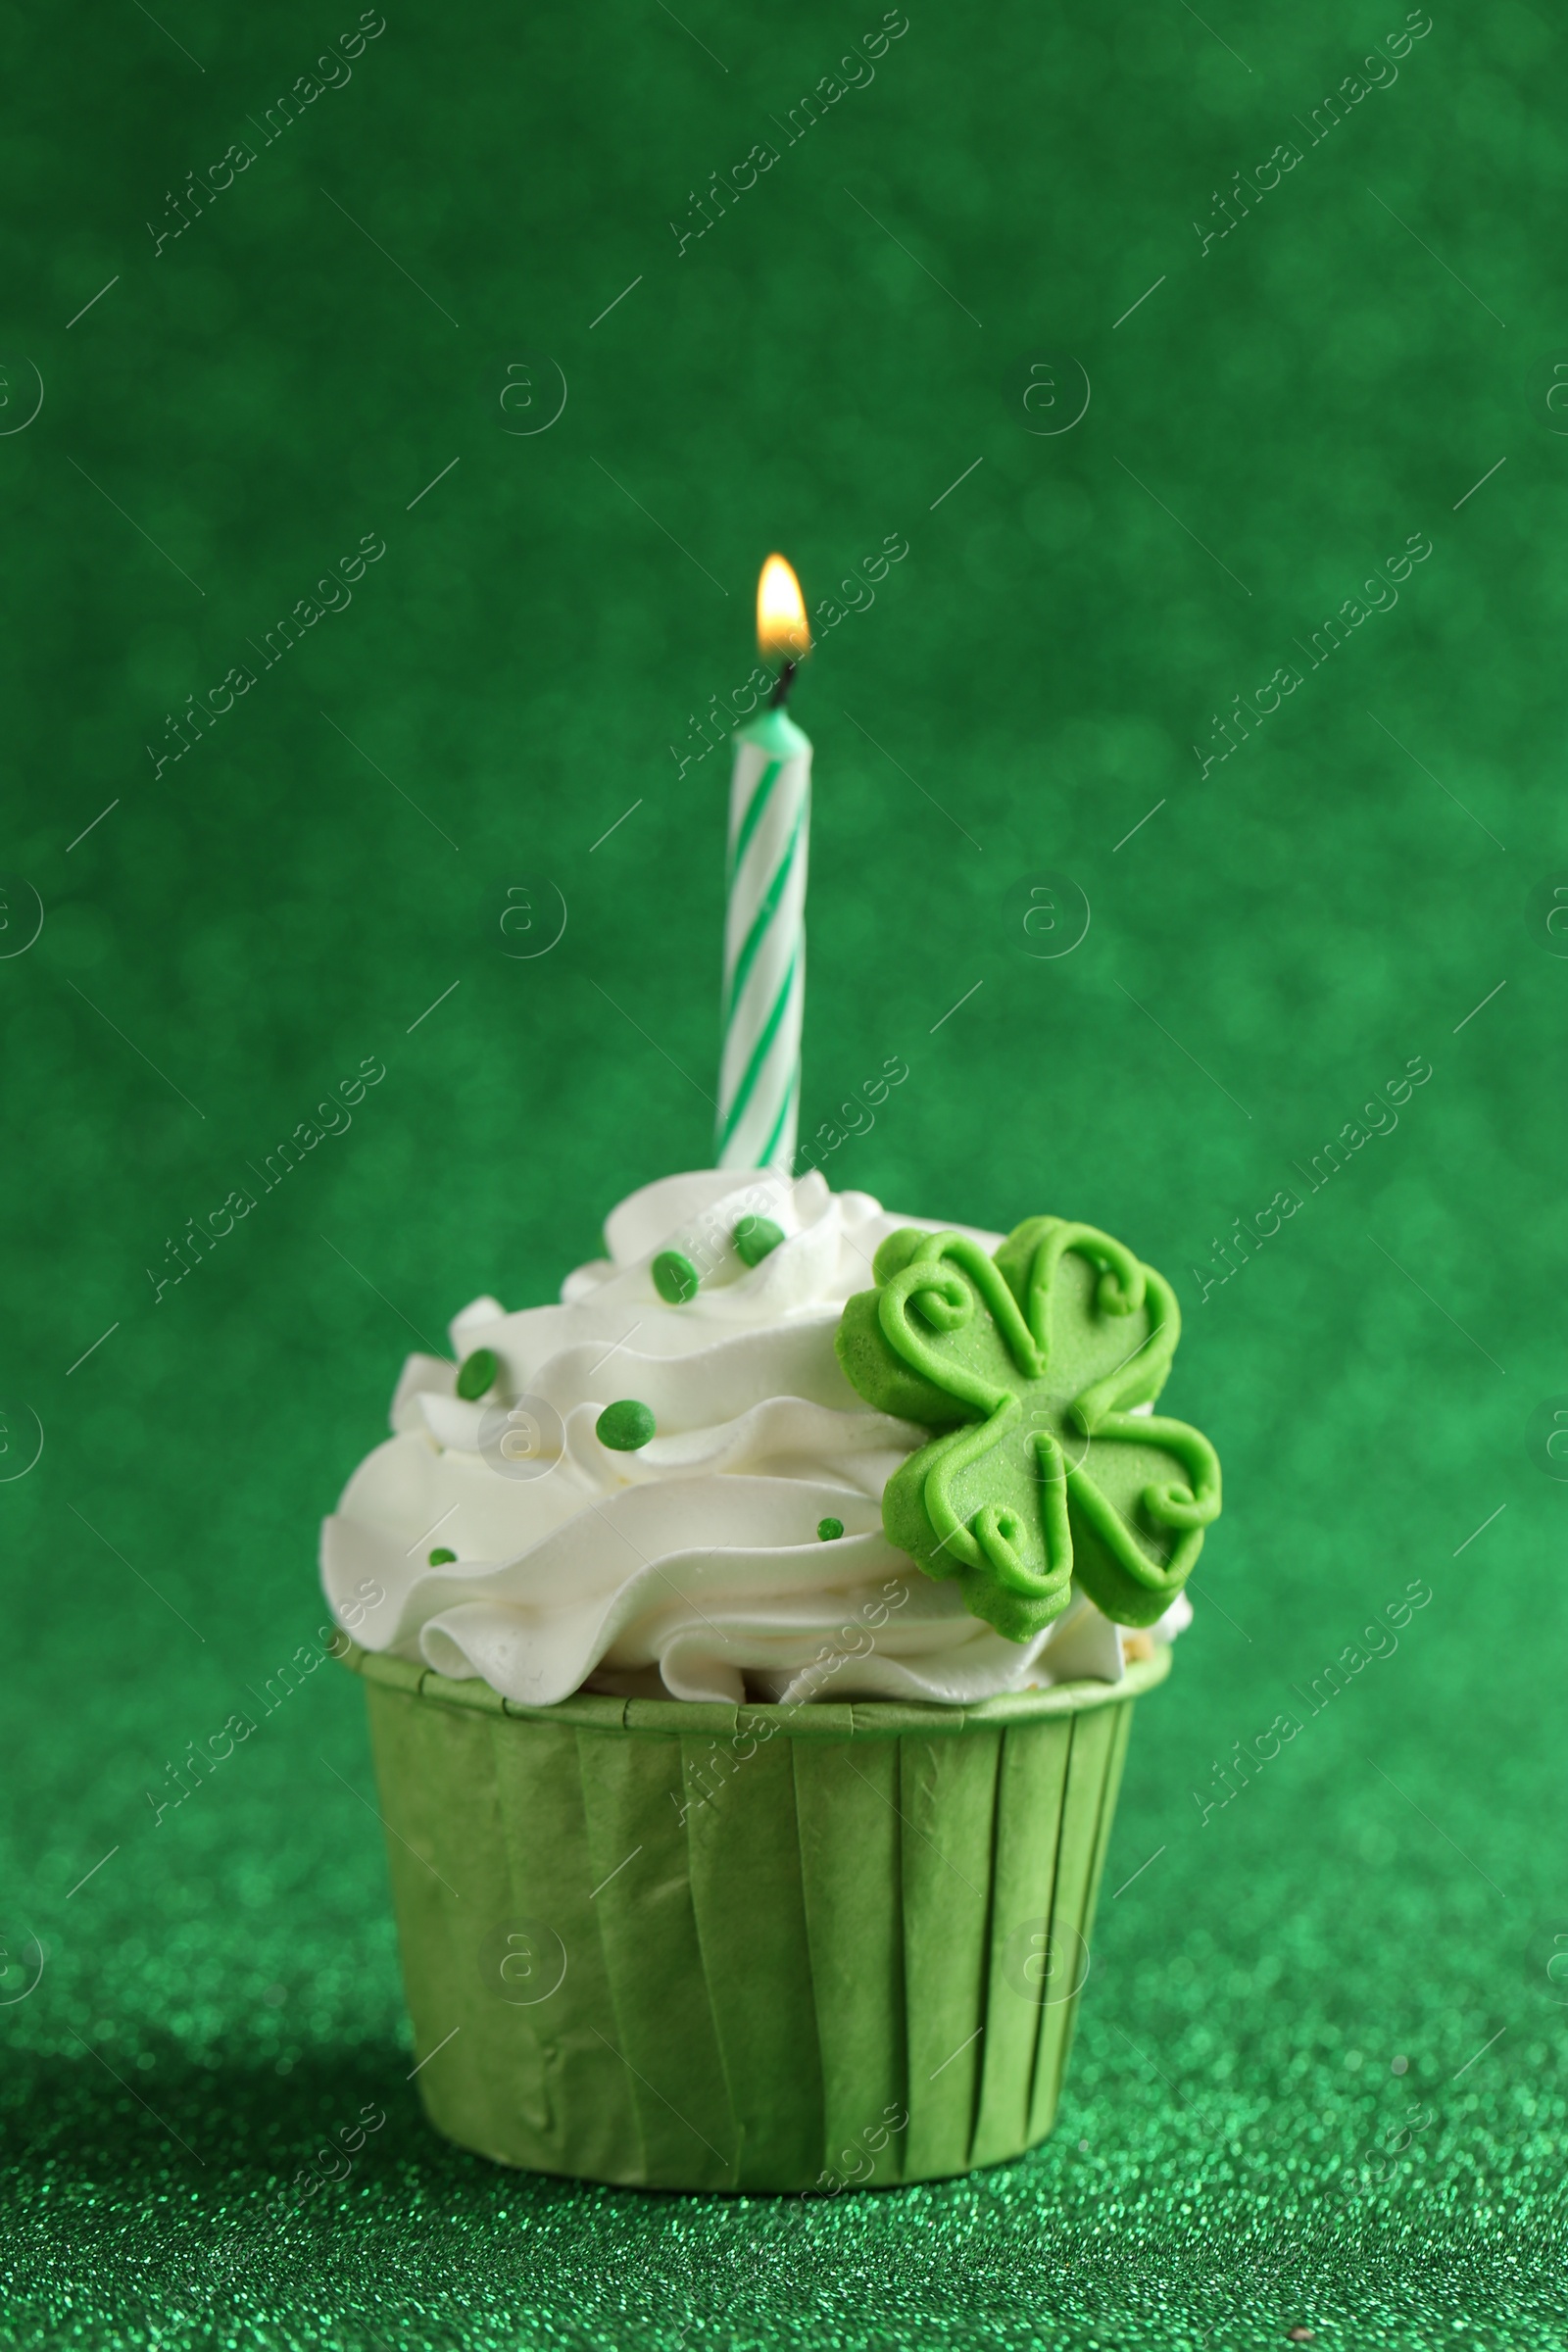 Photo of St. Patrick's day party. Tasty cupcake with clover leaf topper and burning candle on shiny green surface, closeup